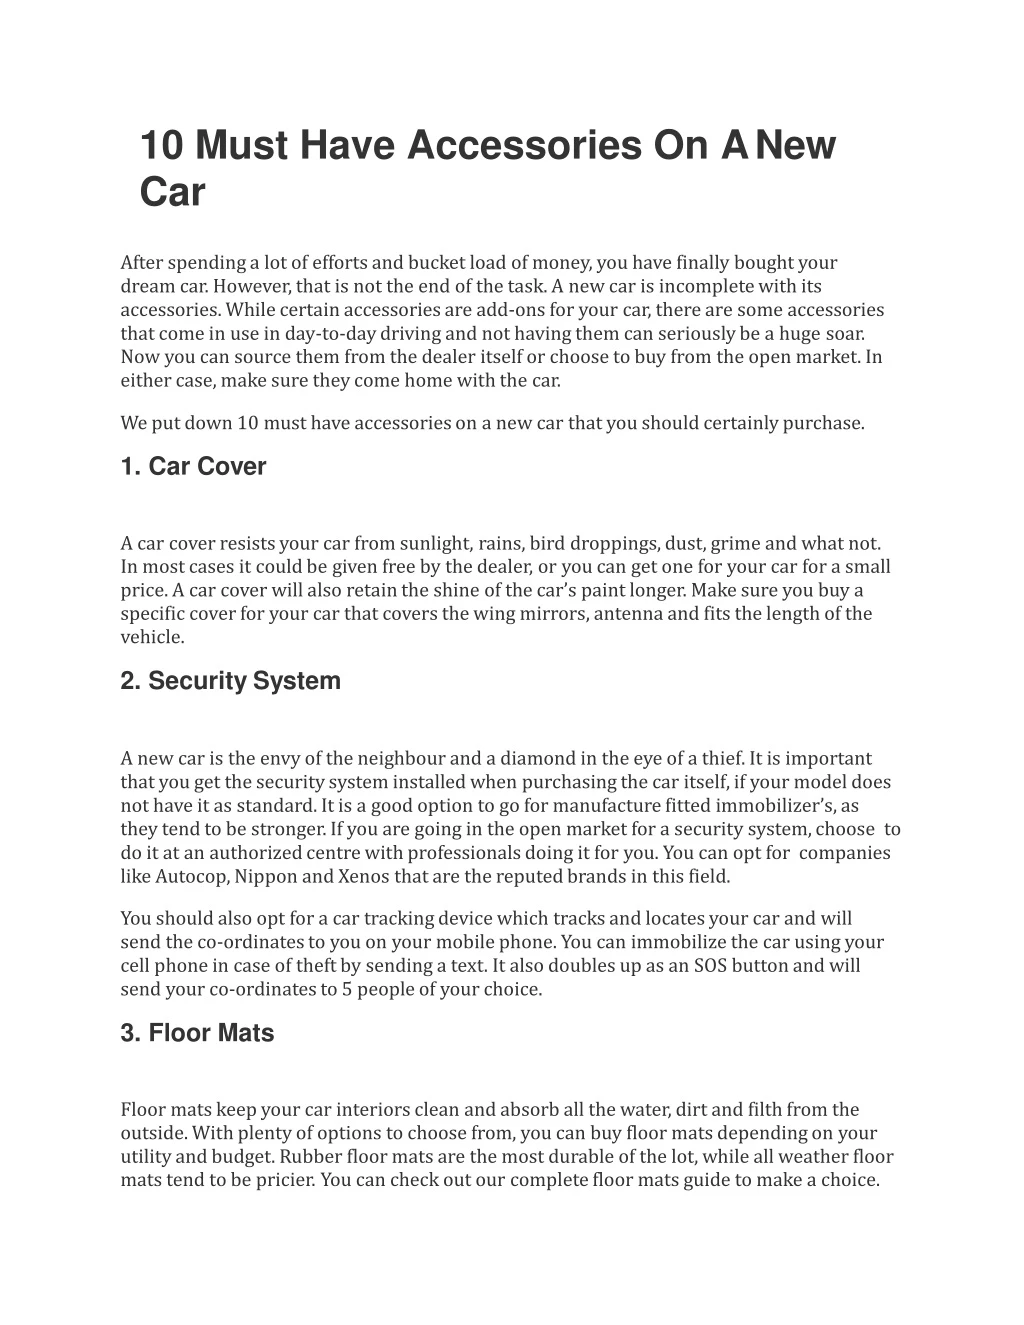 10 must have accessories on a new car